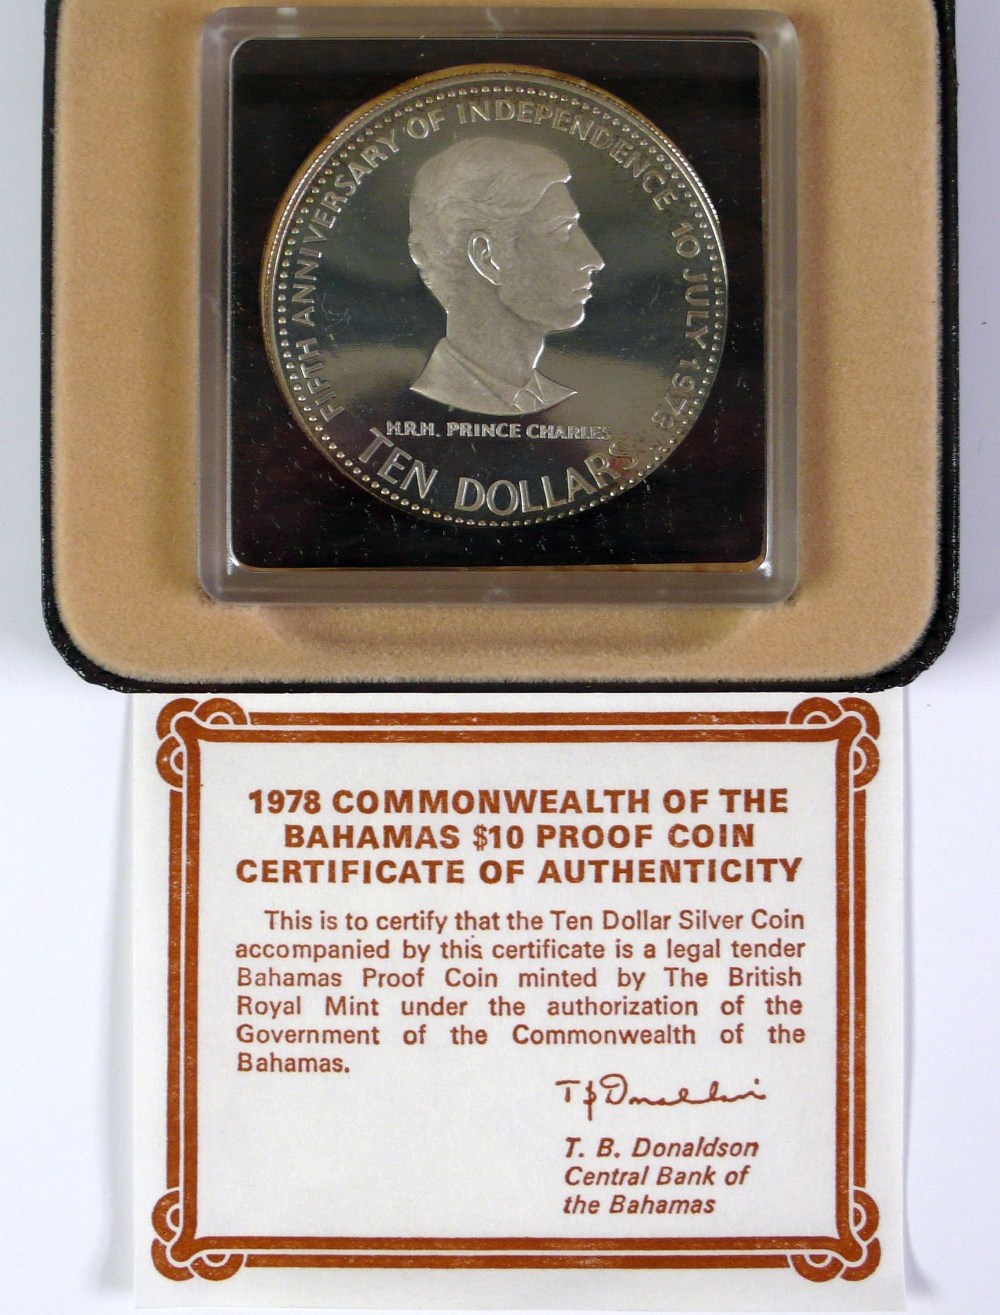 ROYAL MINT PROOF SILVER BAHAMAS TEN DOLLAR COMMEMORATIVE COIN 1978 to commemorate 'Fifth Anniversary